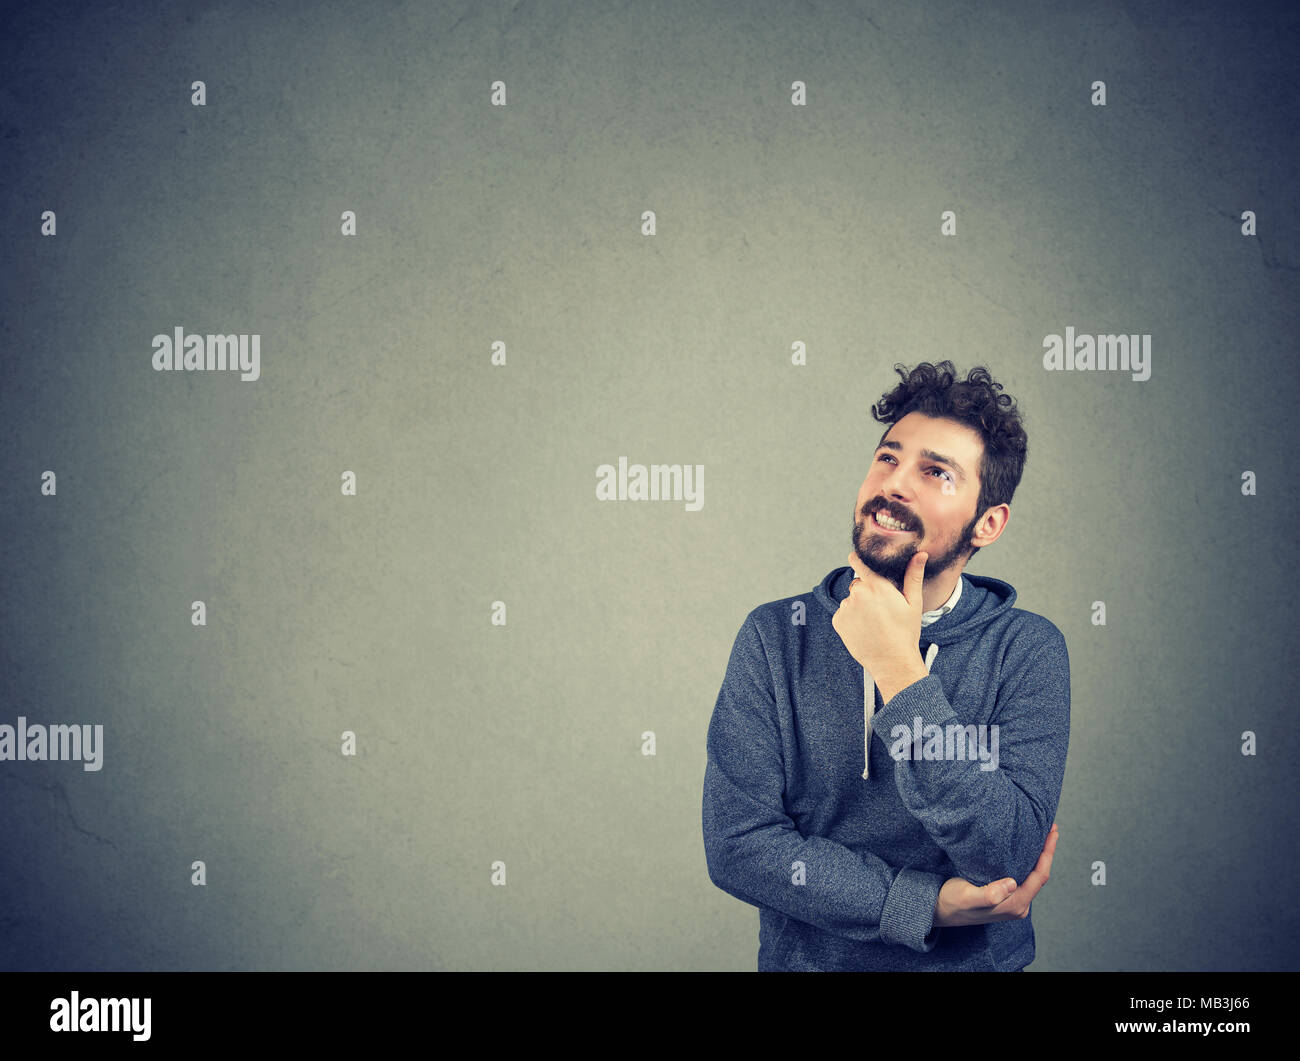 Portrait side profile man thinking looking up isolated on gray wall background with copy space. Human emotions, perception Stock Photo